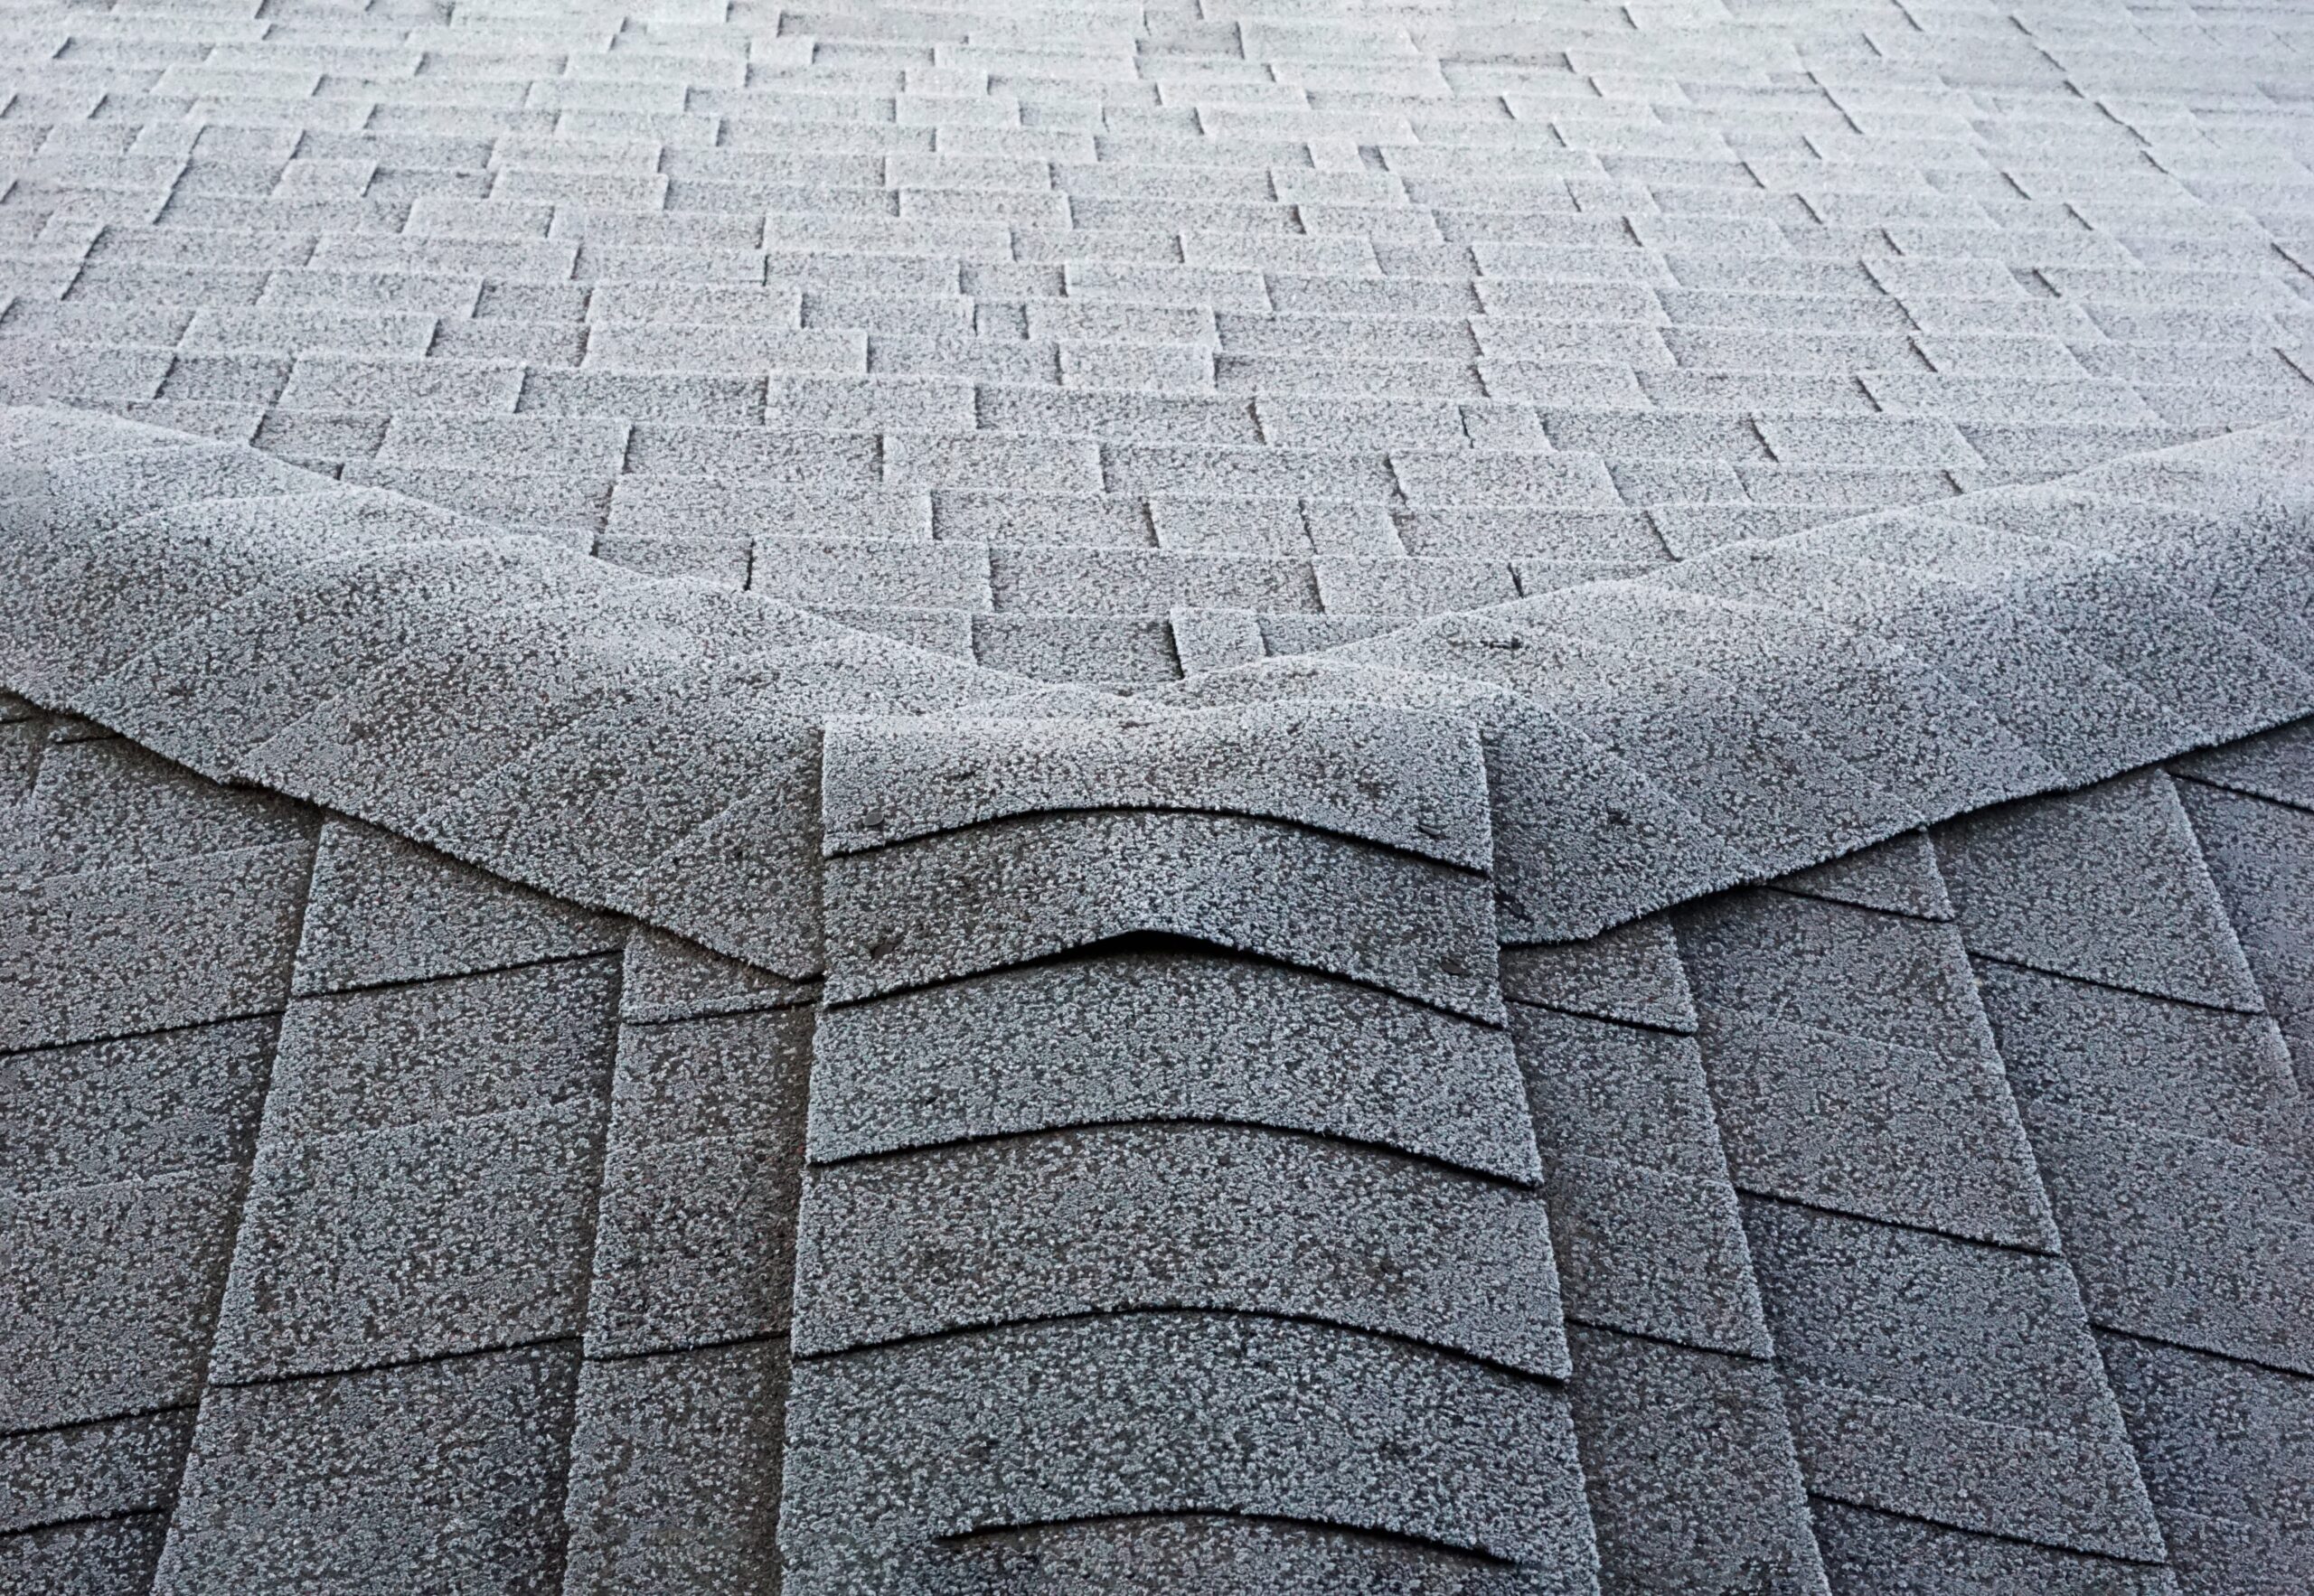 Tips For Keeping Your Roof Clean And Damage Free